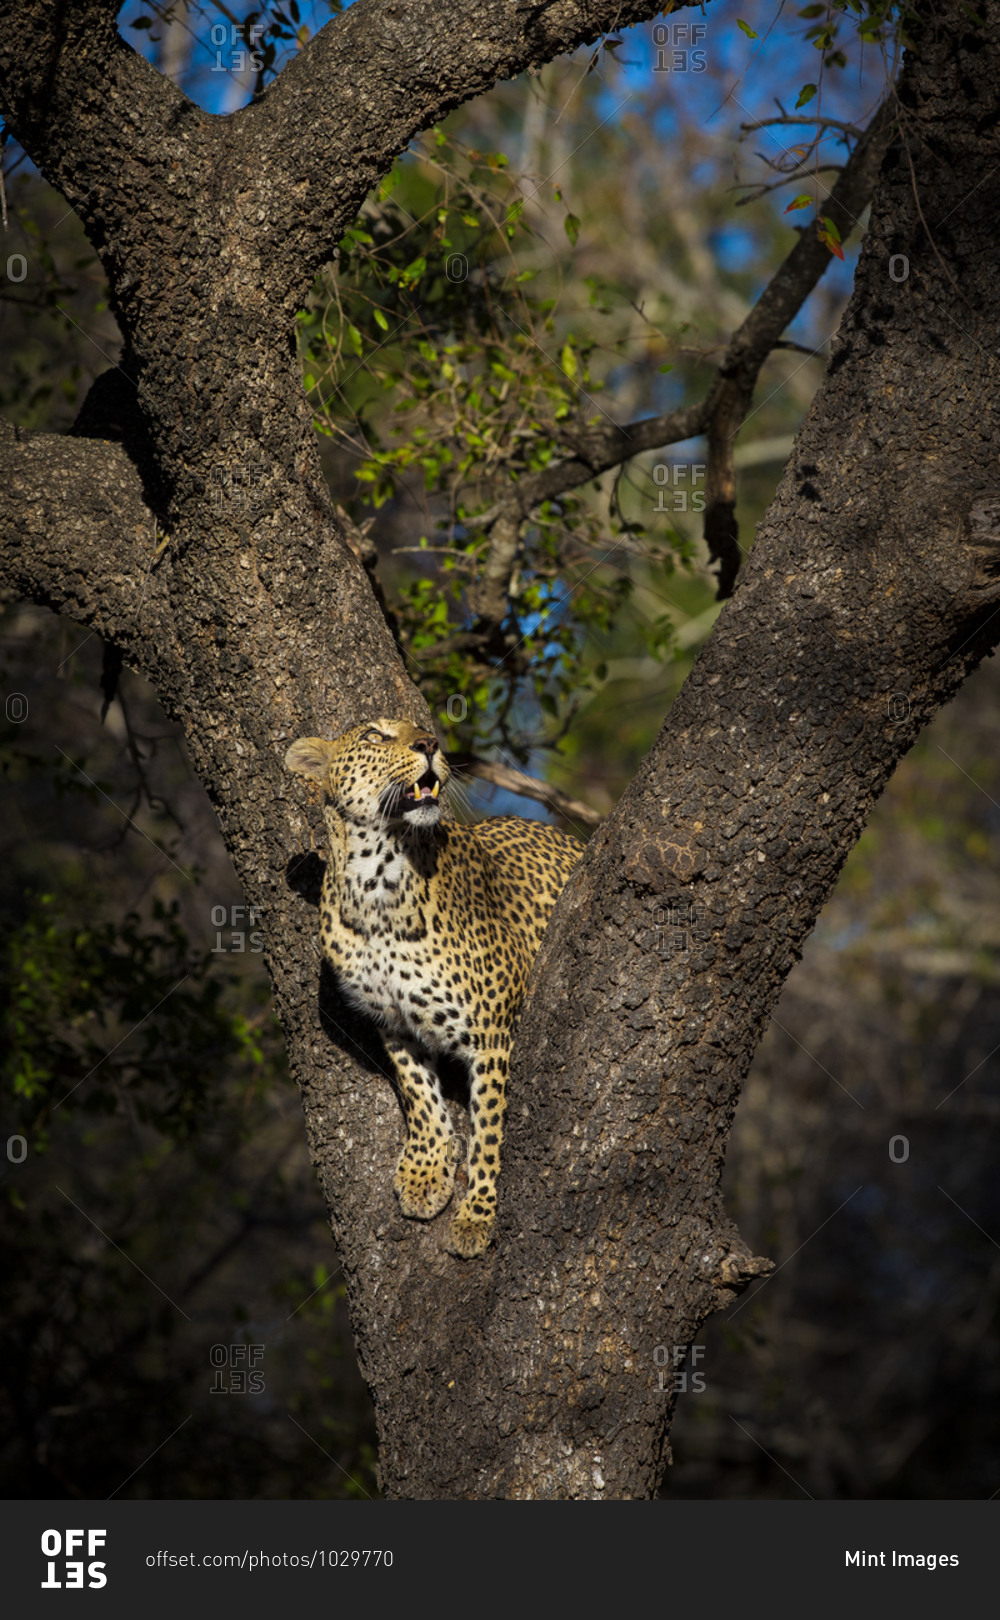 A female leopard, Panthera pardus, stands in the fork of a tree and gazes up.